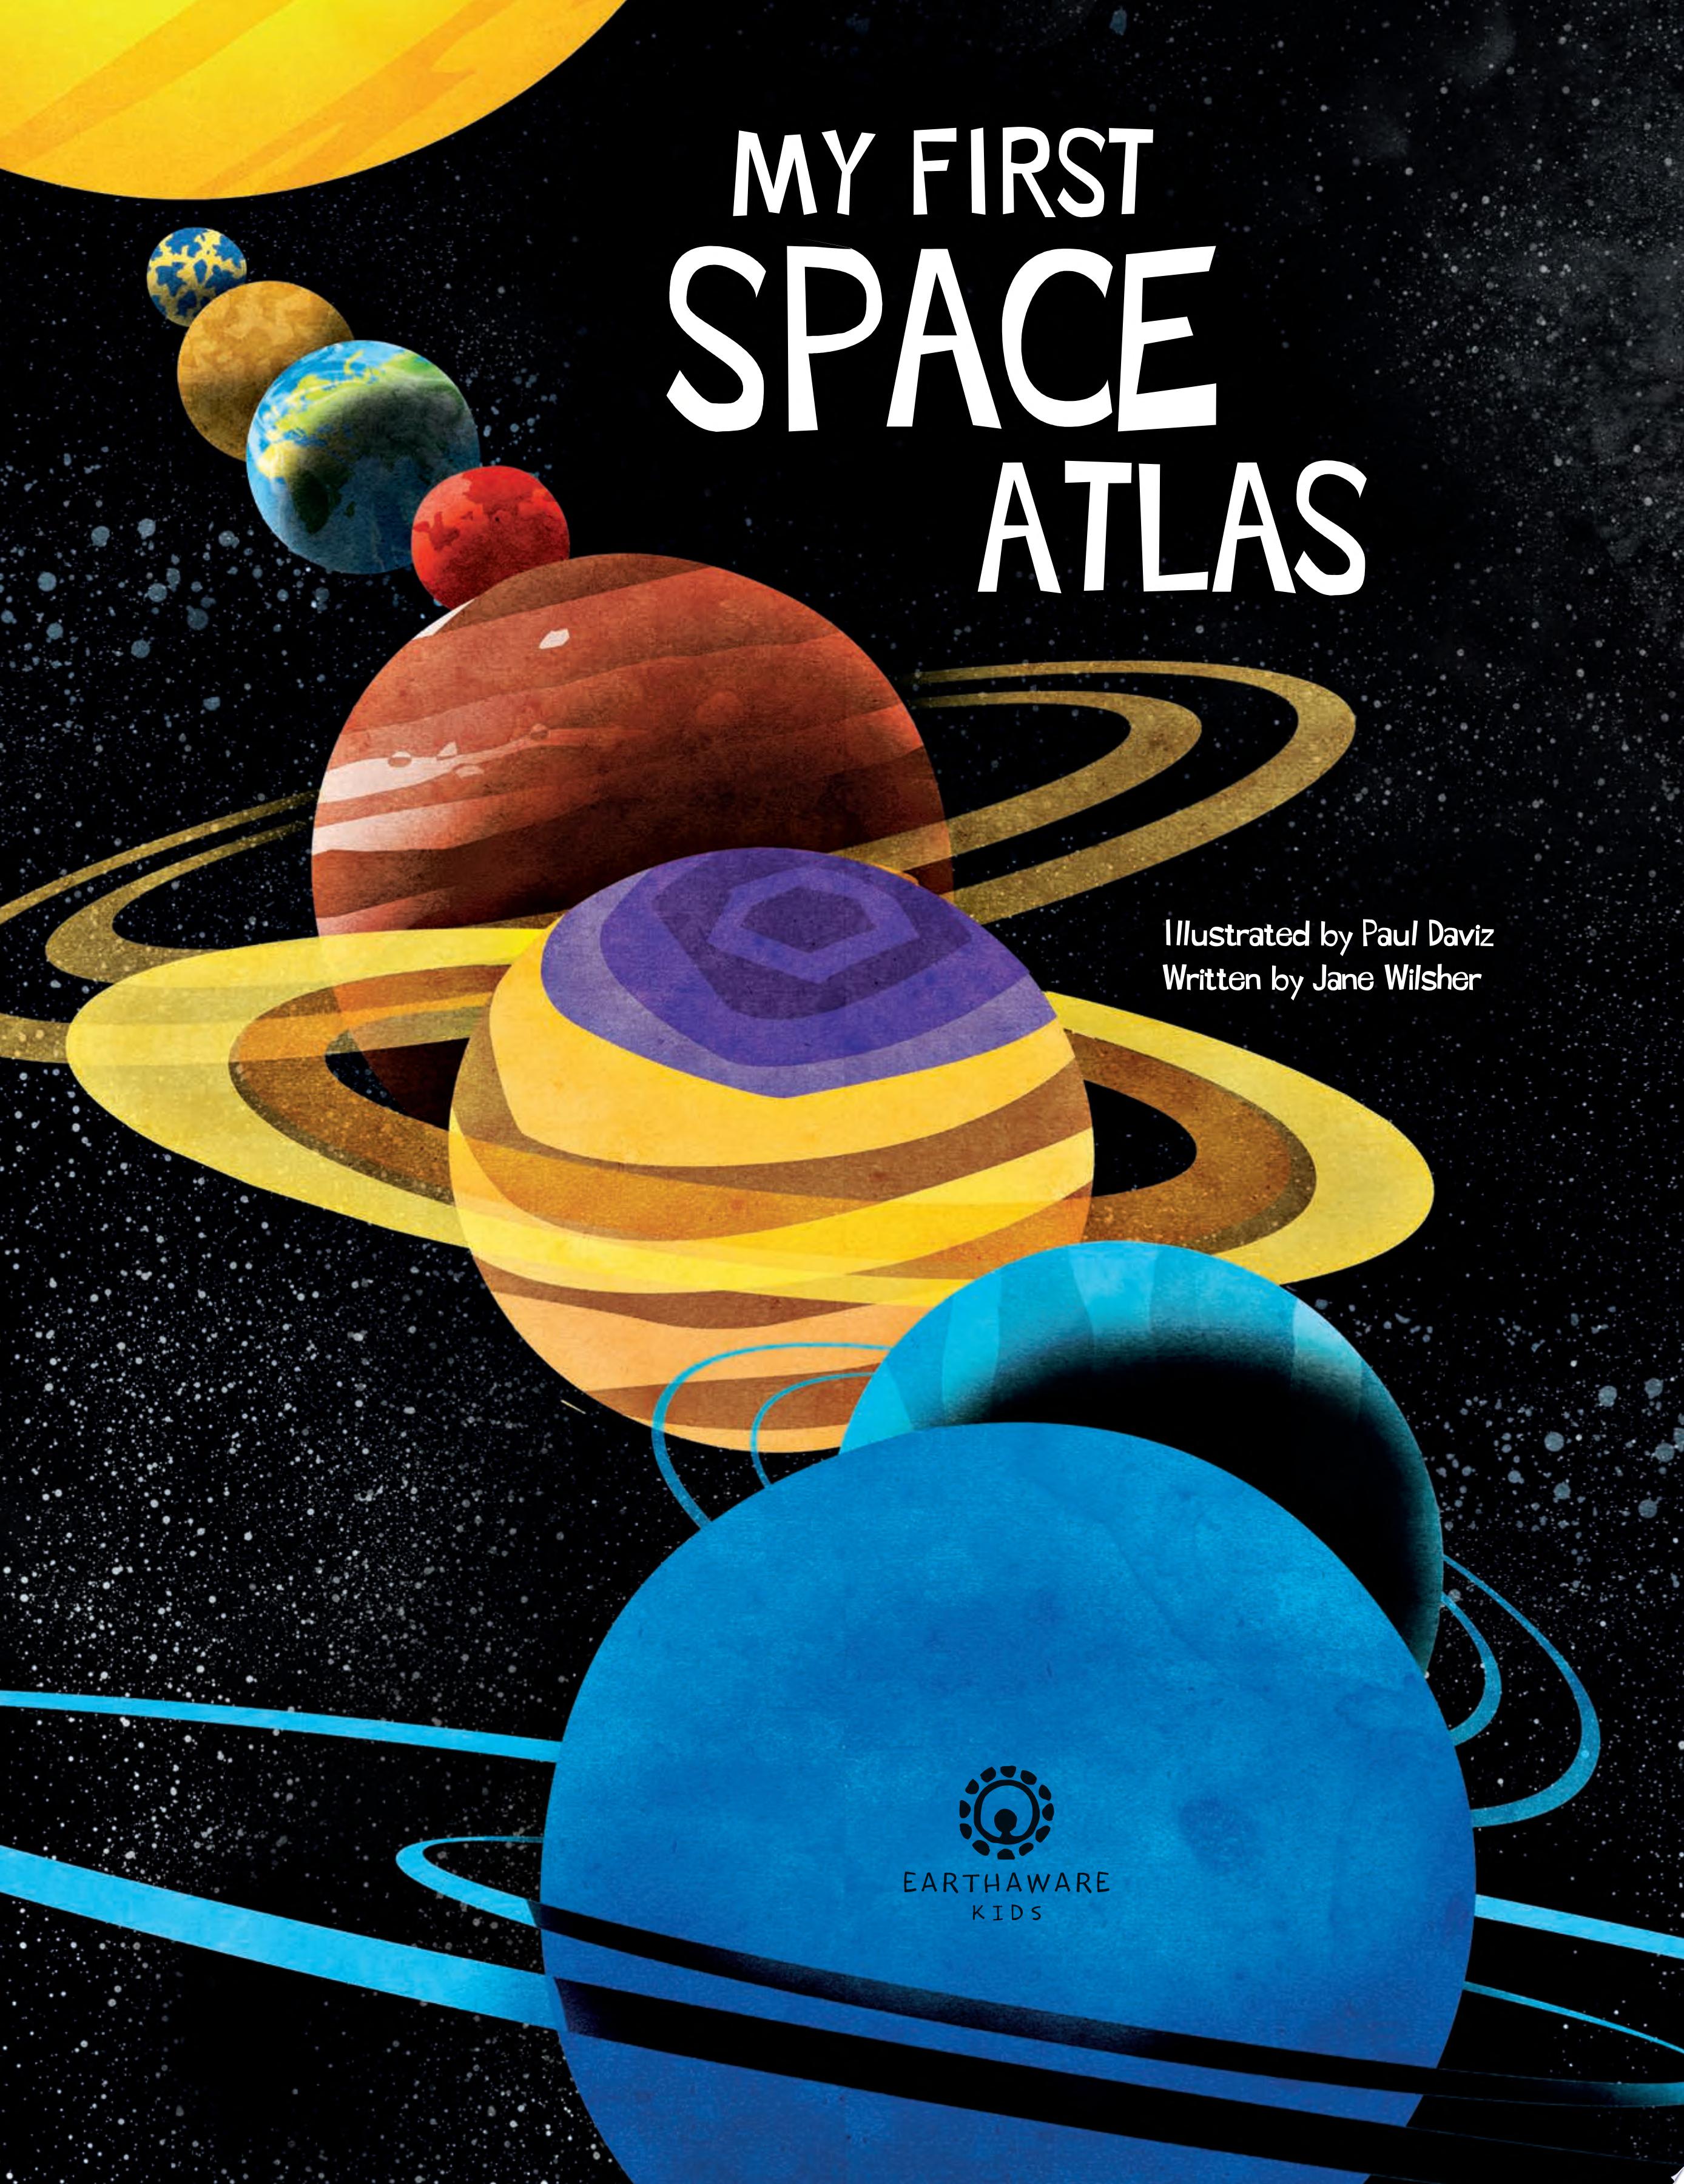 Image for "My First Space Atlas"